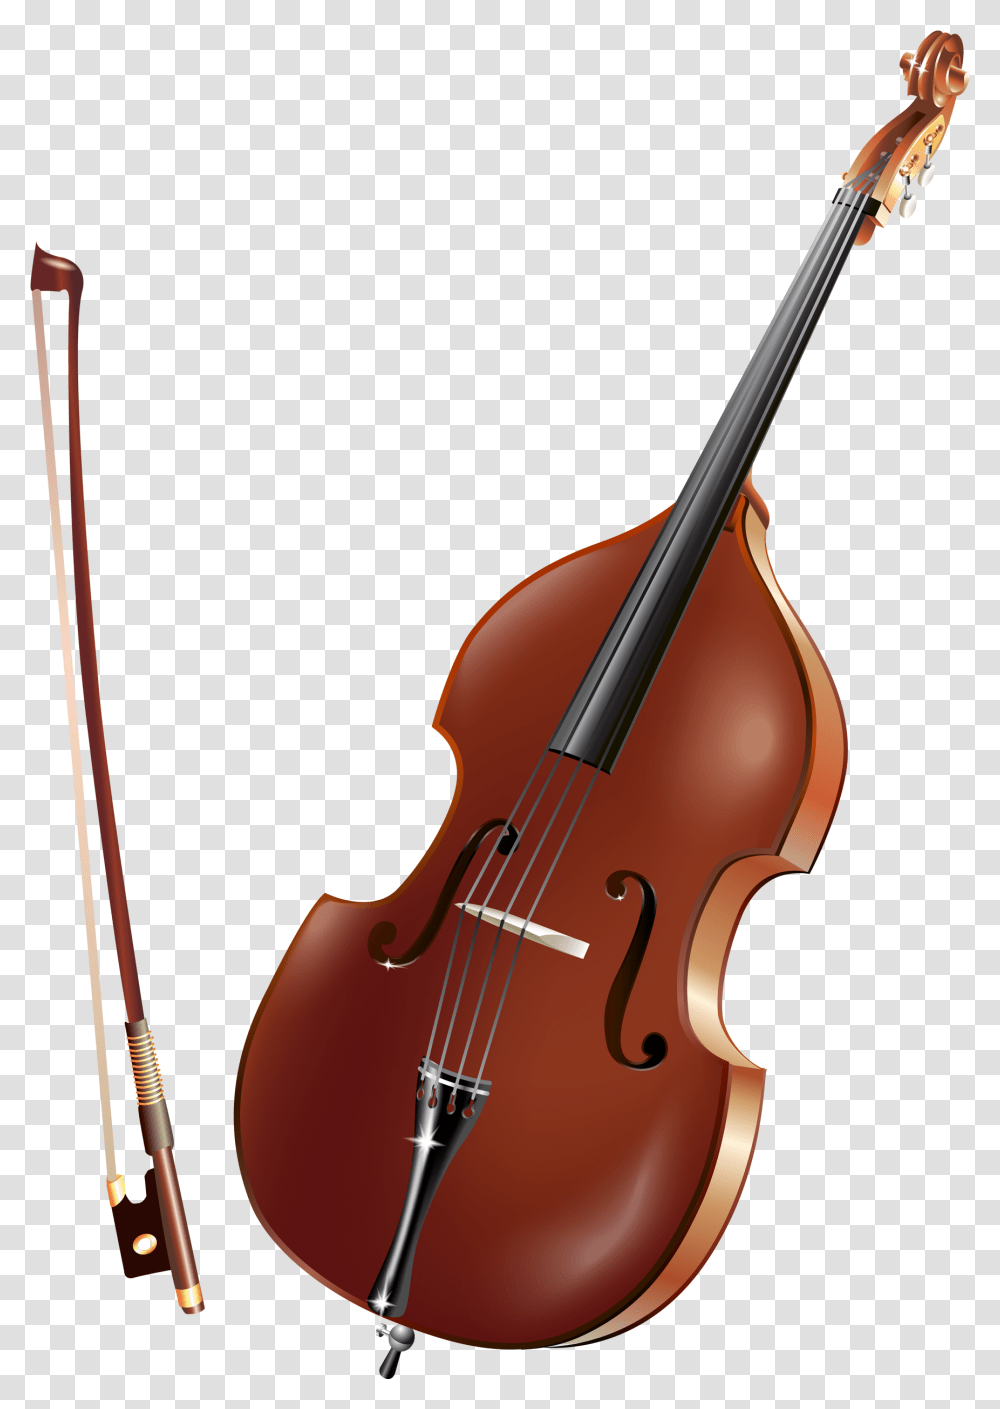 Musical Instrument Violin Cello Clipart For Musical Instruments, Leisure Activities, Fiddle, Viola Transparent Png